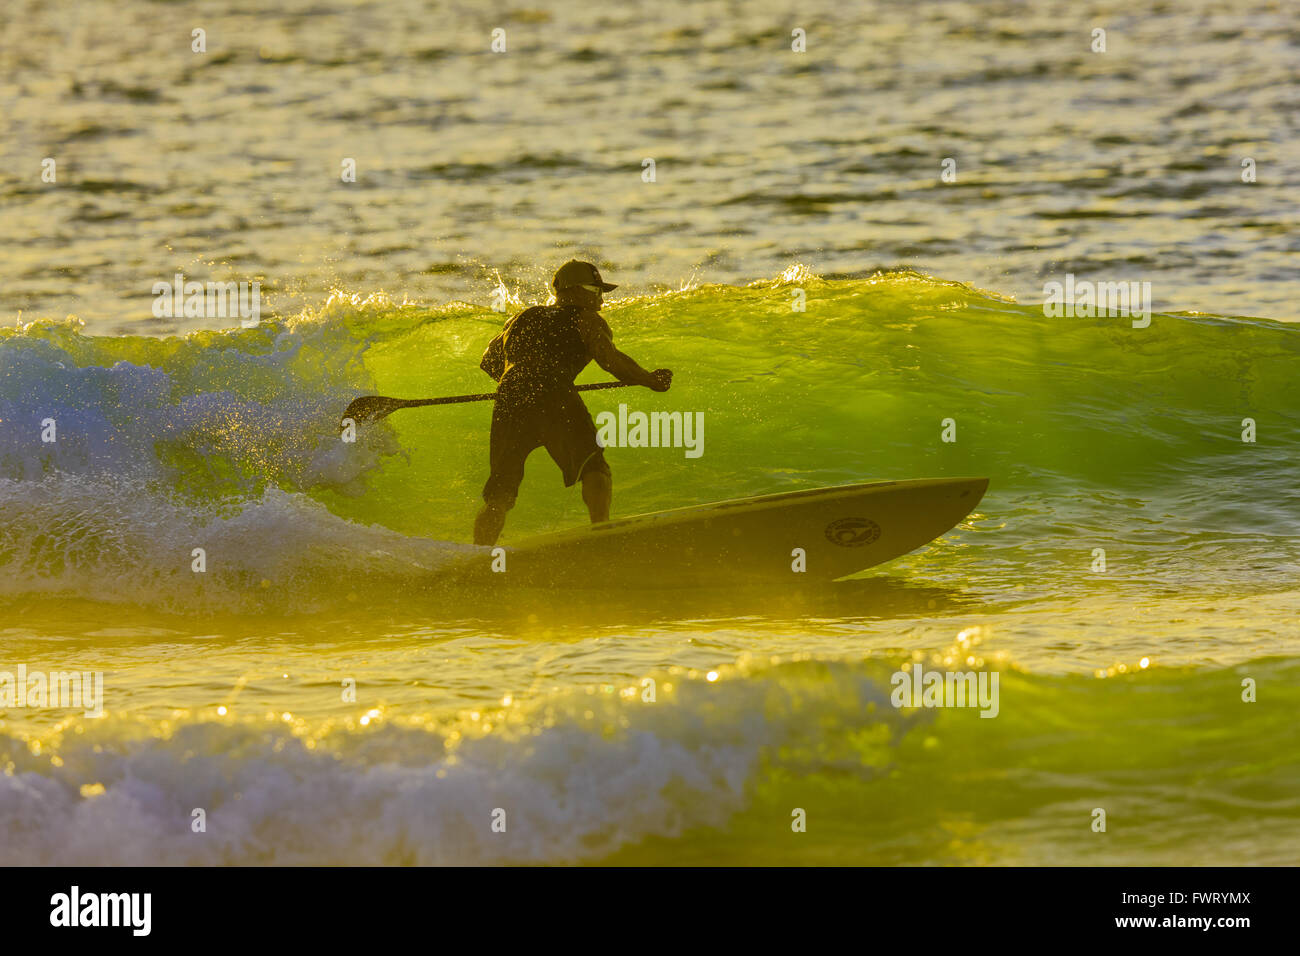 stand up paddle surfing Maui Hawaii Stock Photo